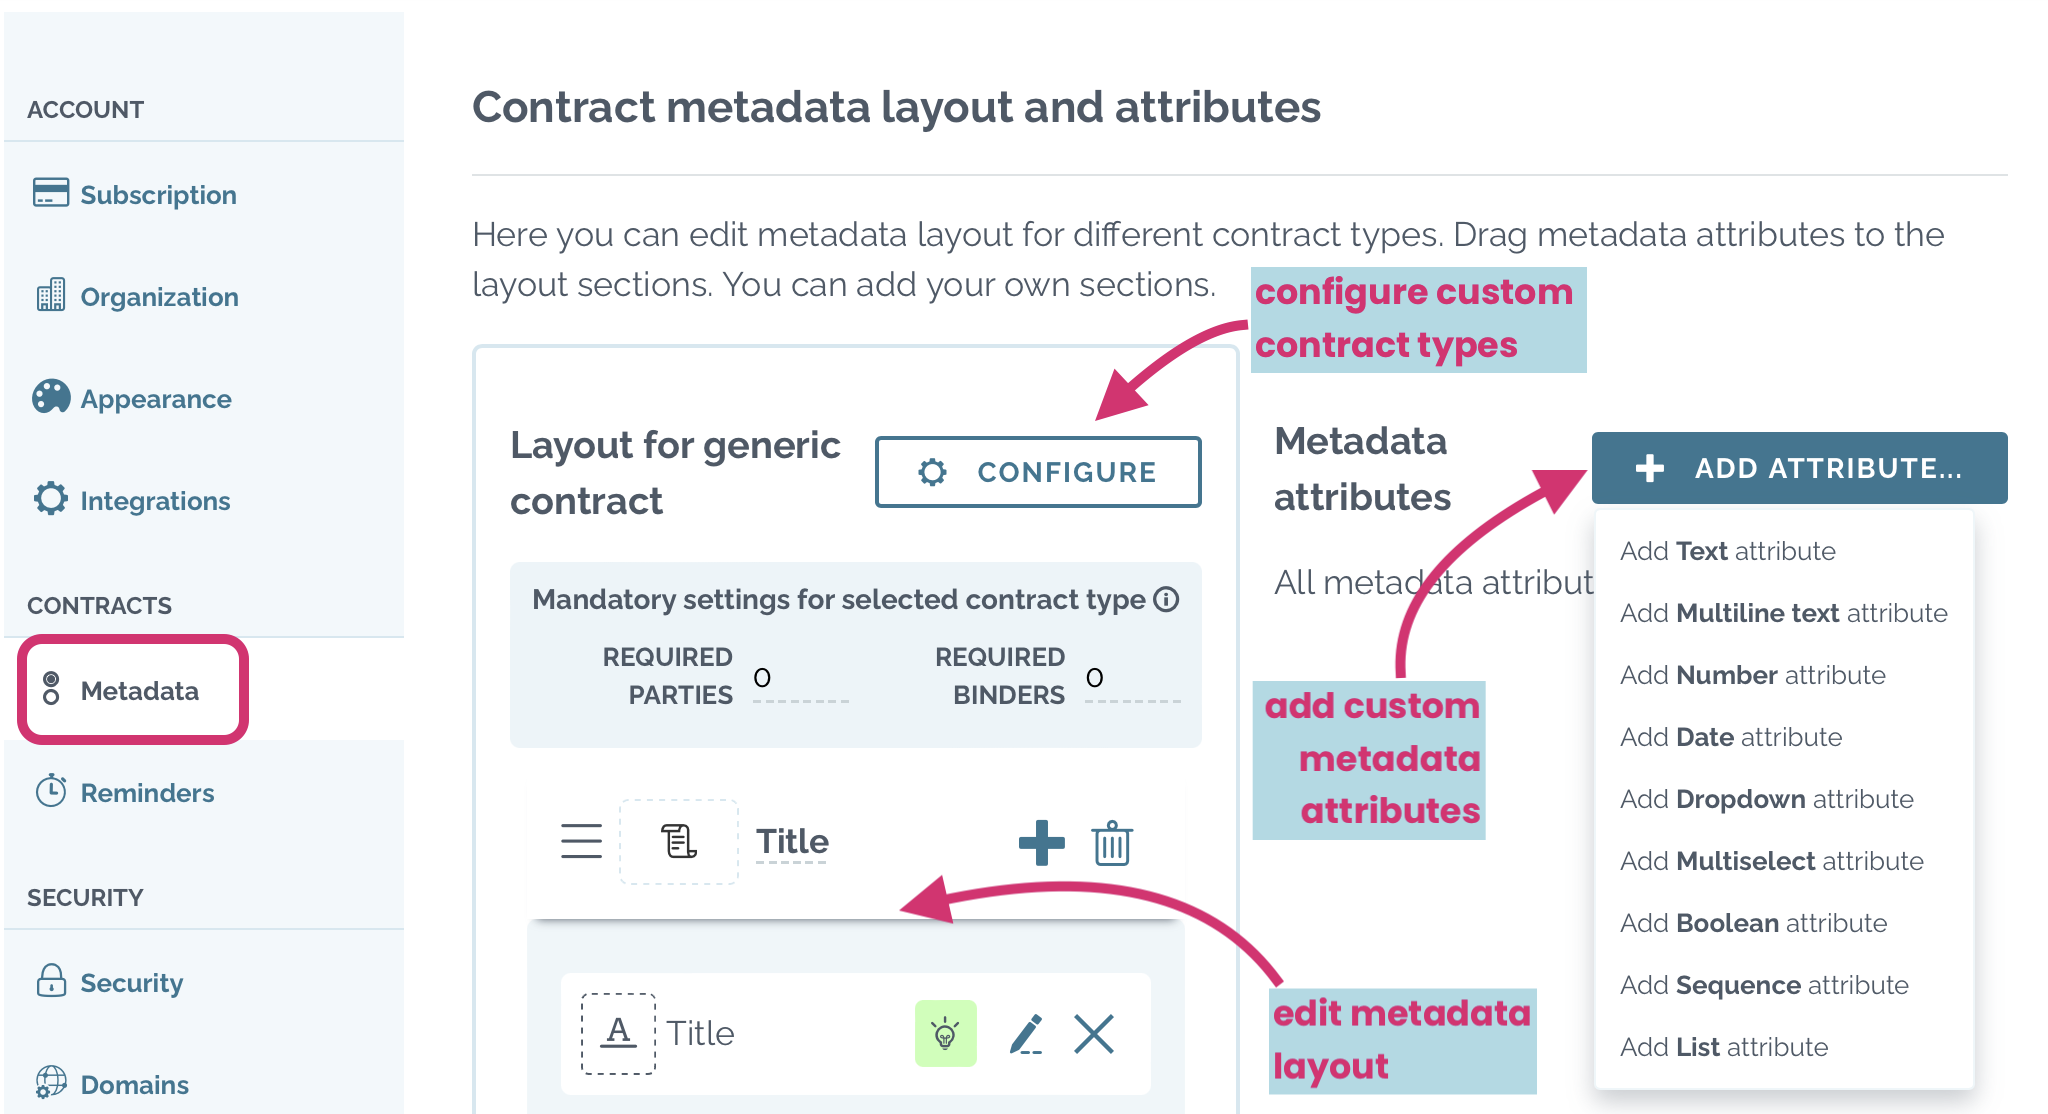 zefort contract metadata layout and attributes